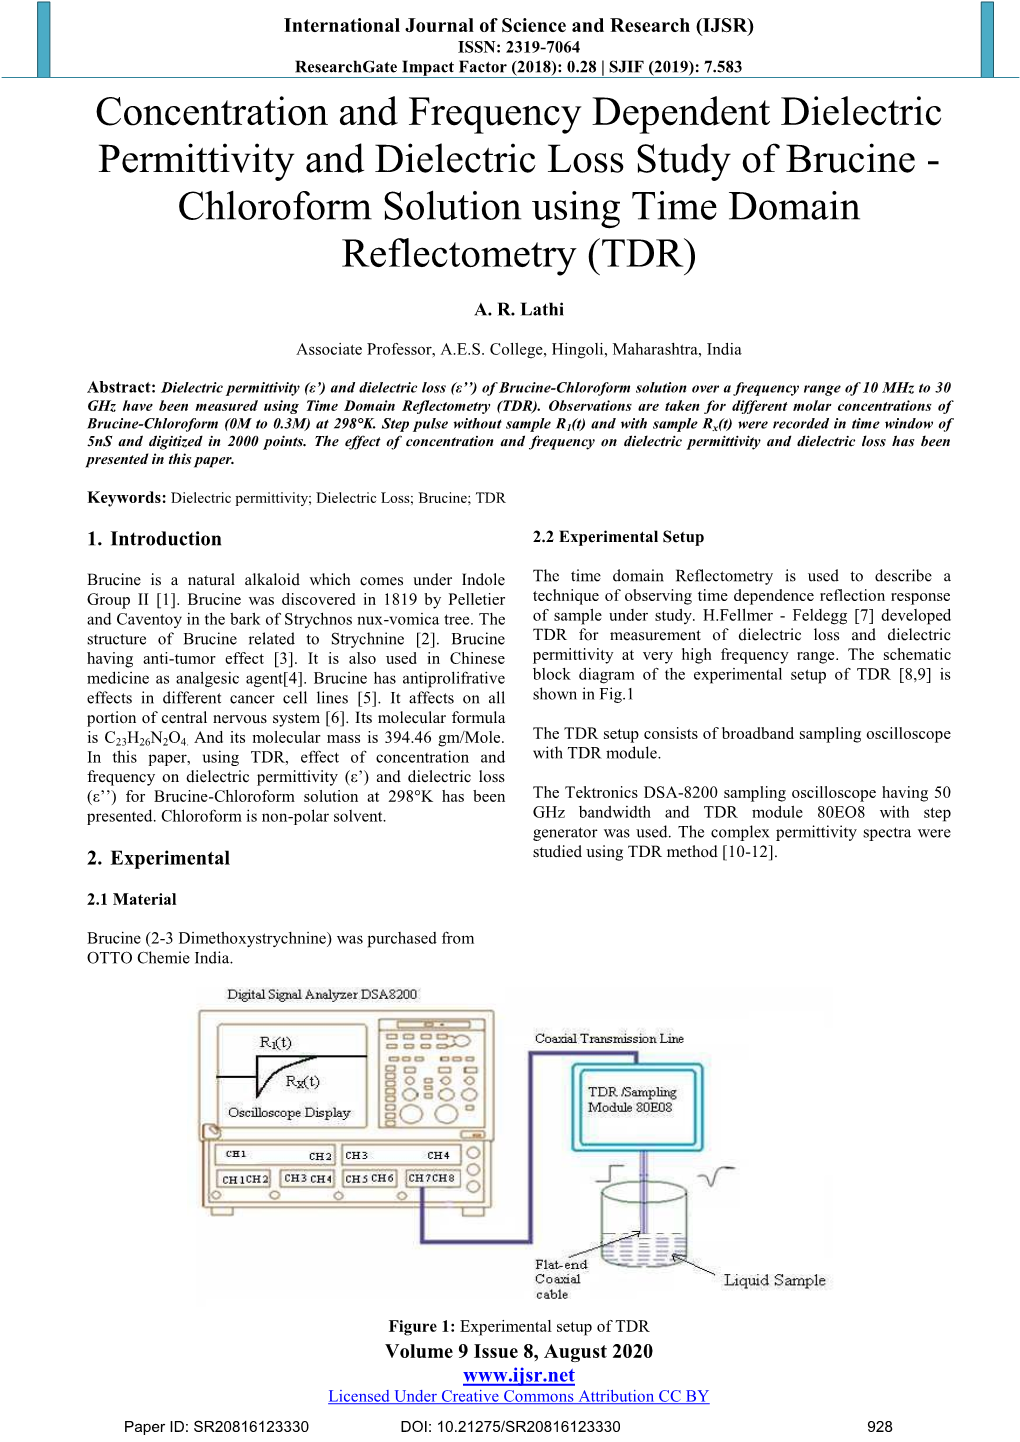 Concentration and Frequency Dependent Dielectric Permittivity and Dielectric Loss Study of Brucine - Chloroform Solution Using Time Domain Reflectometry (TDR)